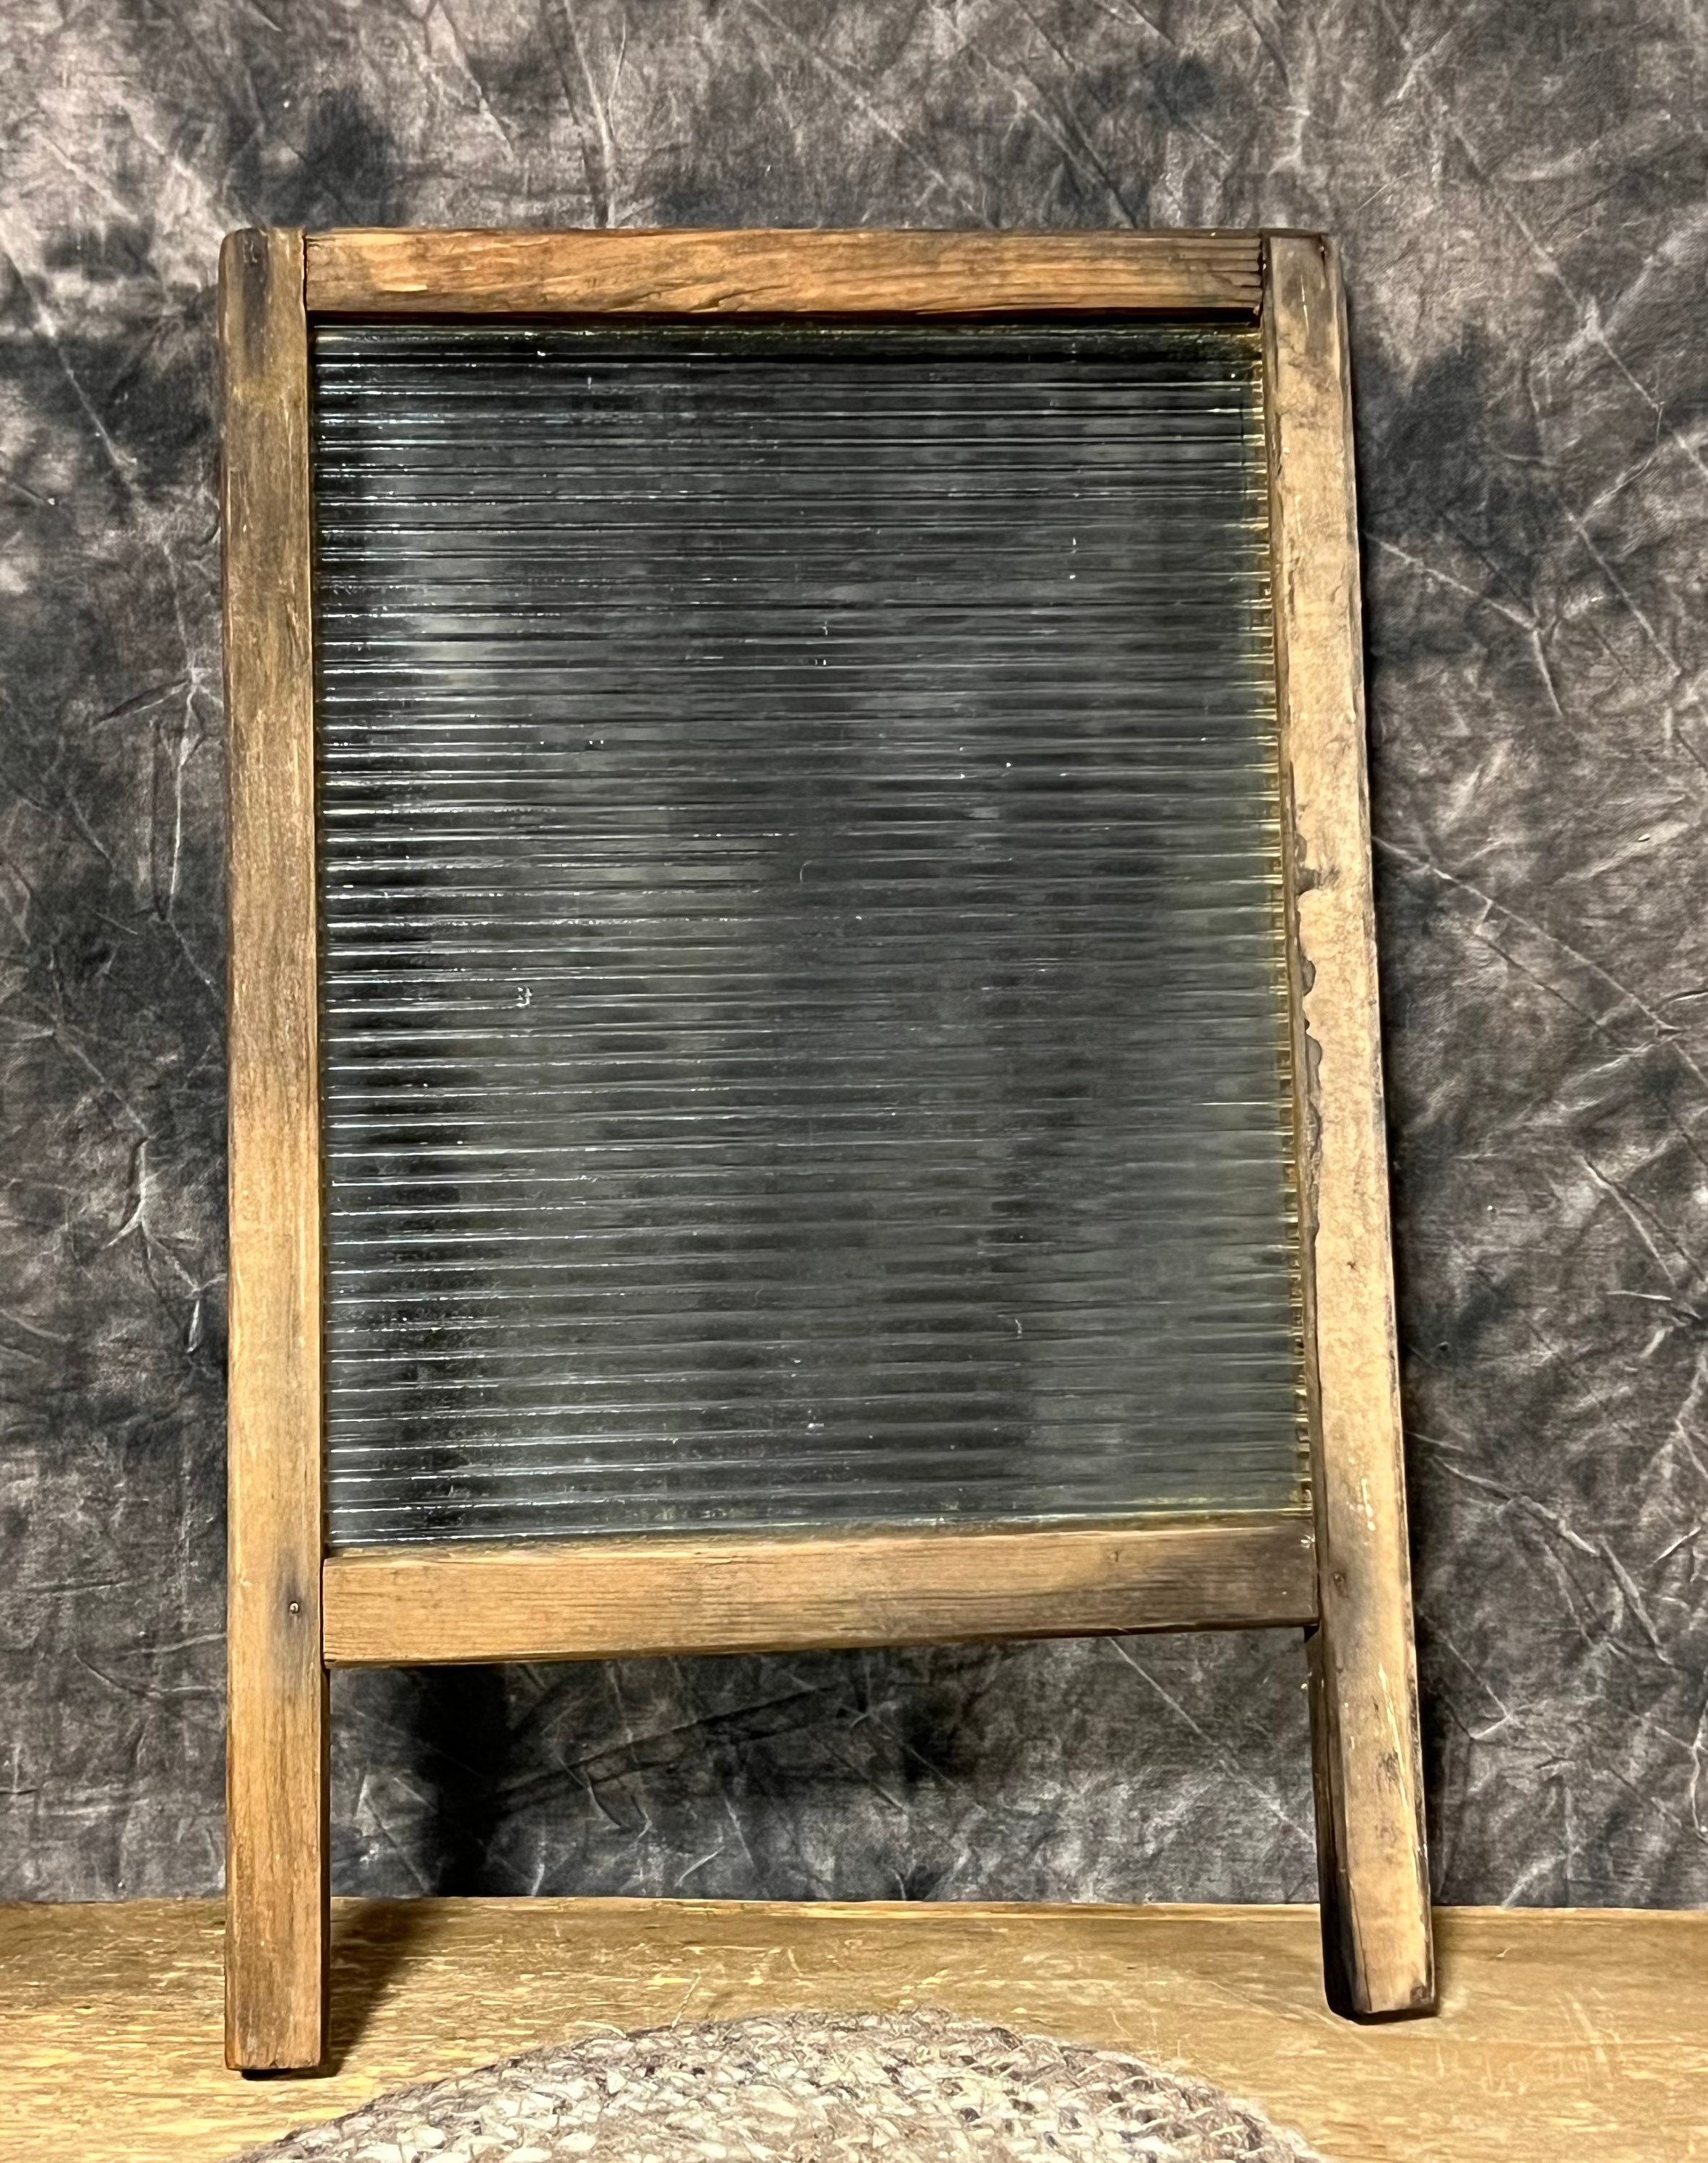 Wooden Hand Washboard for Laundry Washing Clothes, Anti-slip Cleaning Board  for Hand Washing Scrub Board, Rustic Old Fashioned Wash Board Countryside  Vintage Traditional Style 